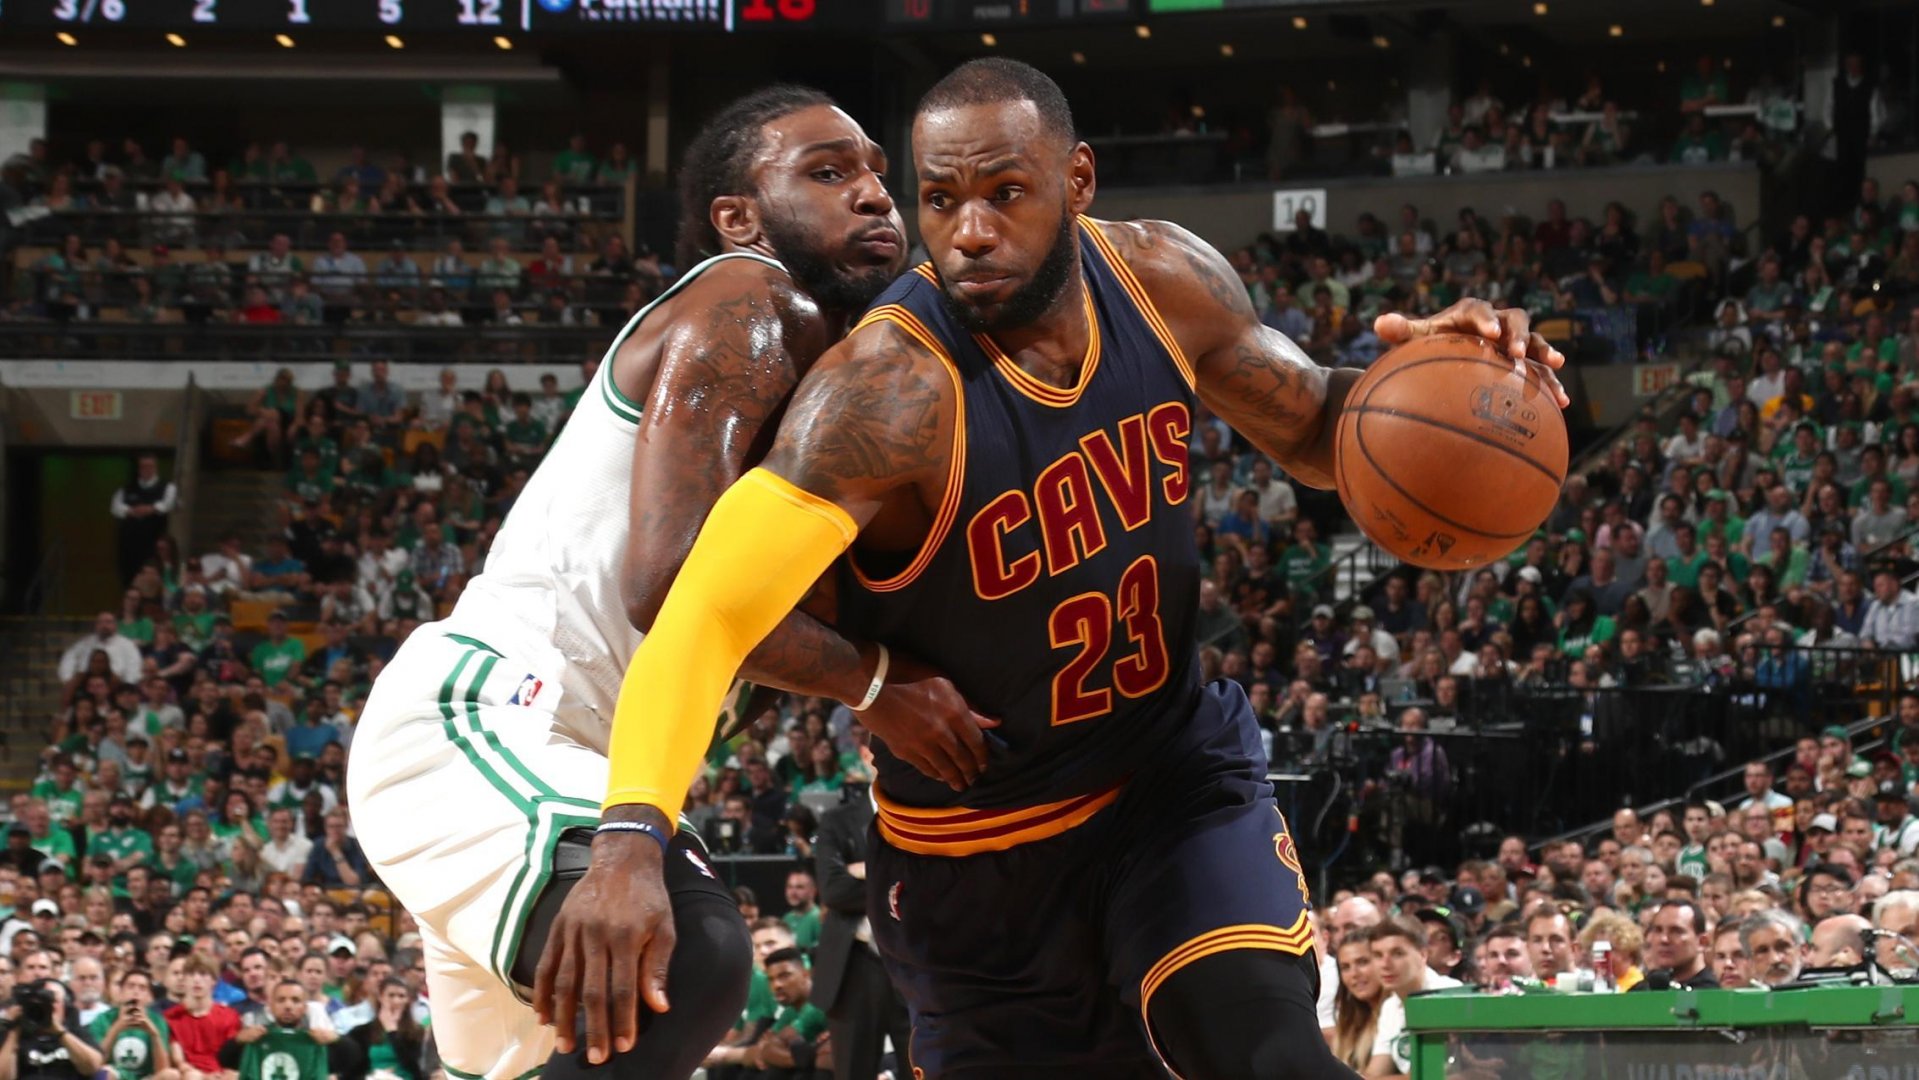 LeBron James playing for the Cleveland Cavaliers in the 2012 Eastern Conference Finals against the Celtics